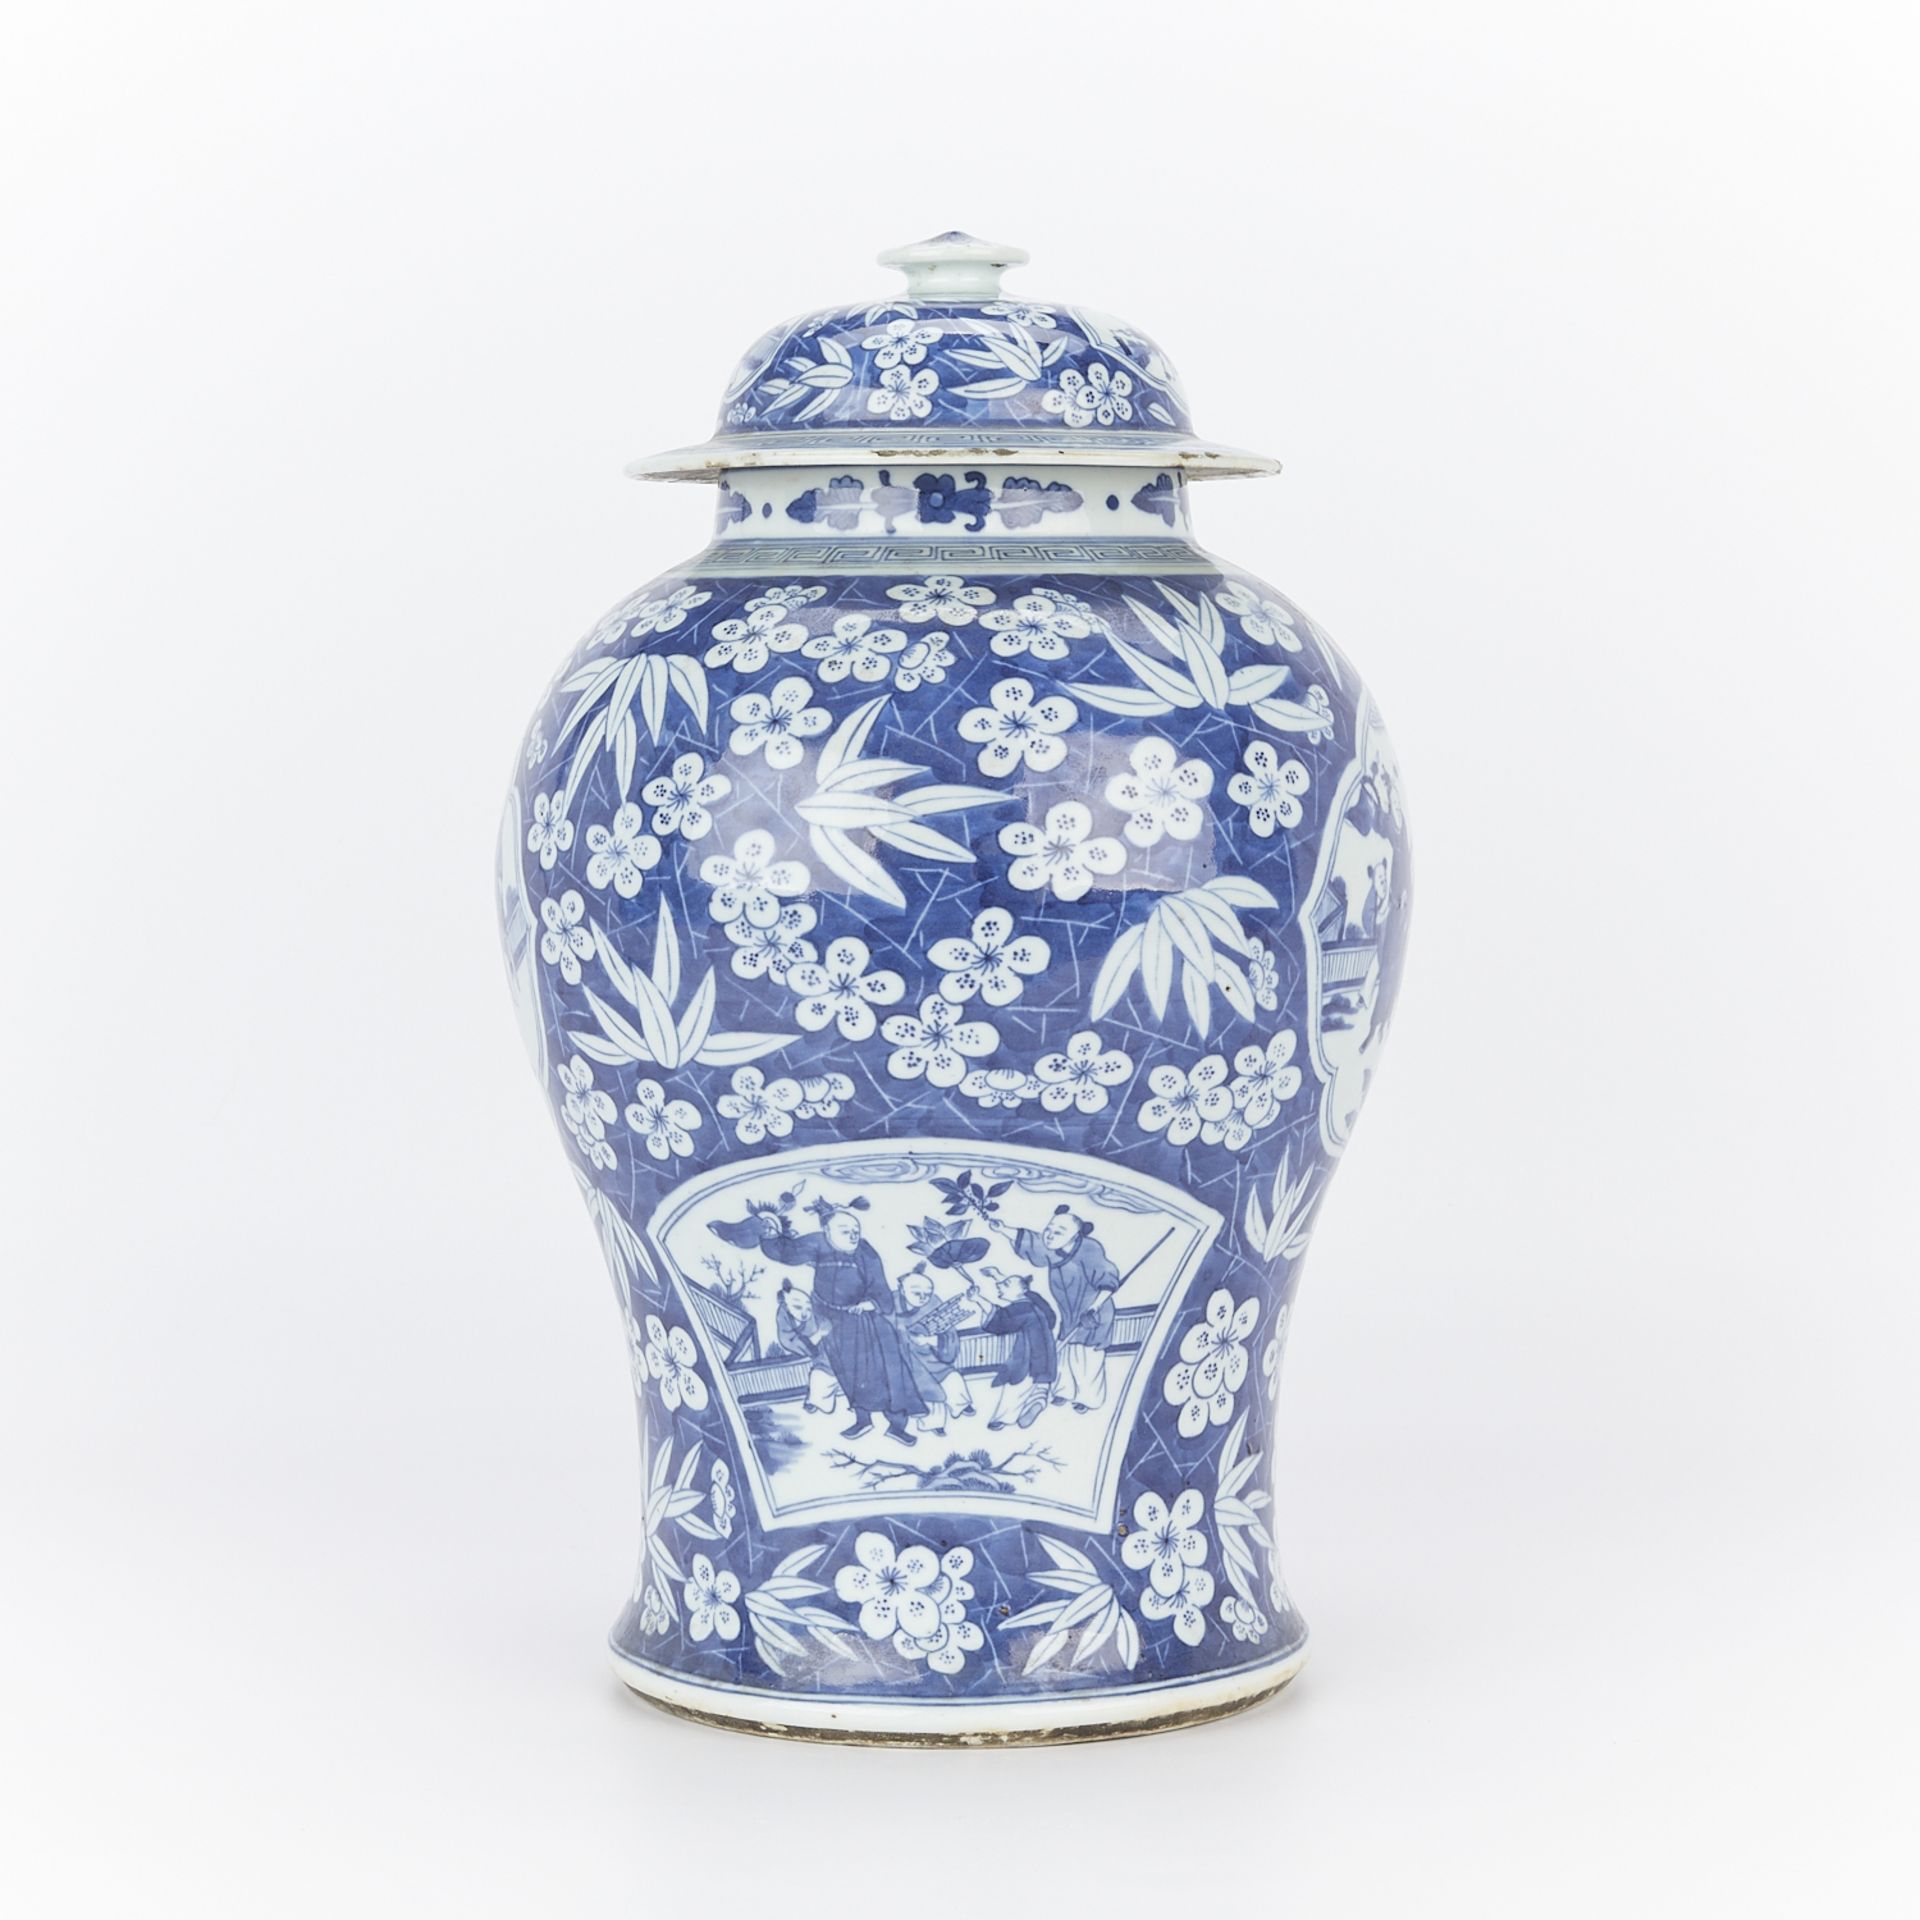 18th/19th c. Chinese B&W Porcelain Baluster Vase - Image 6 of 15